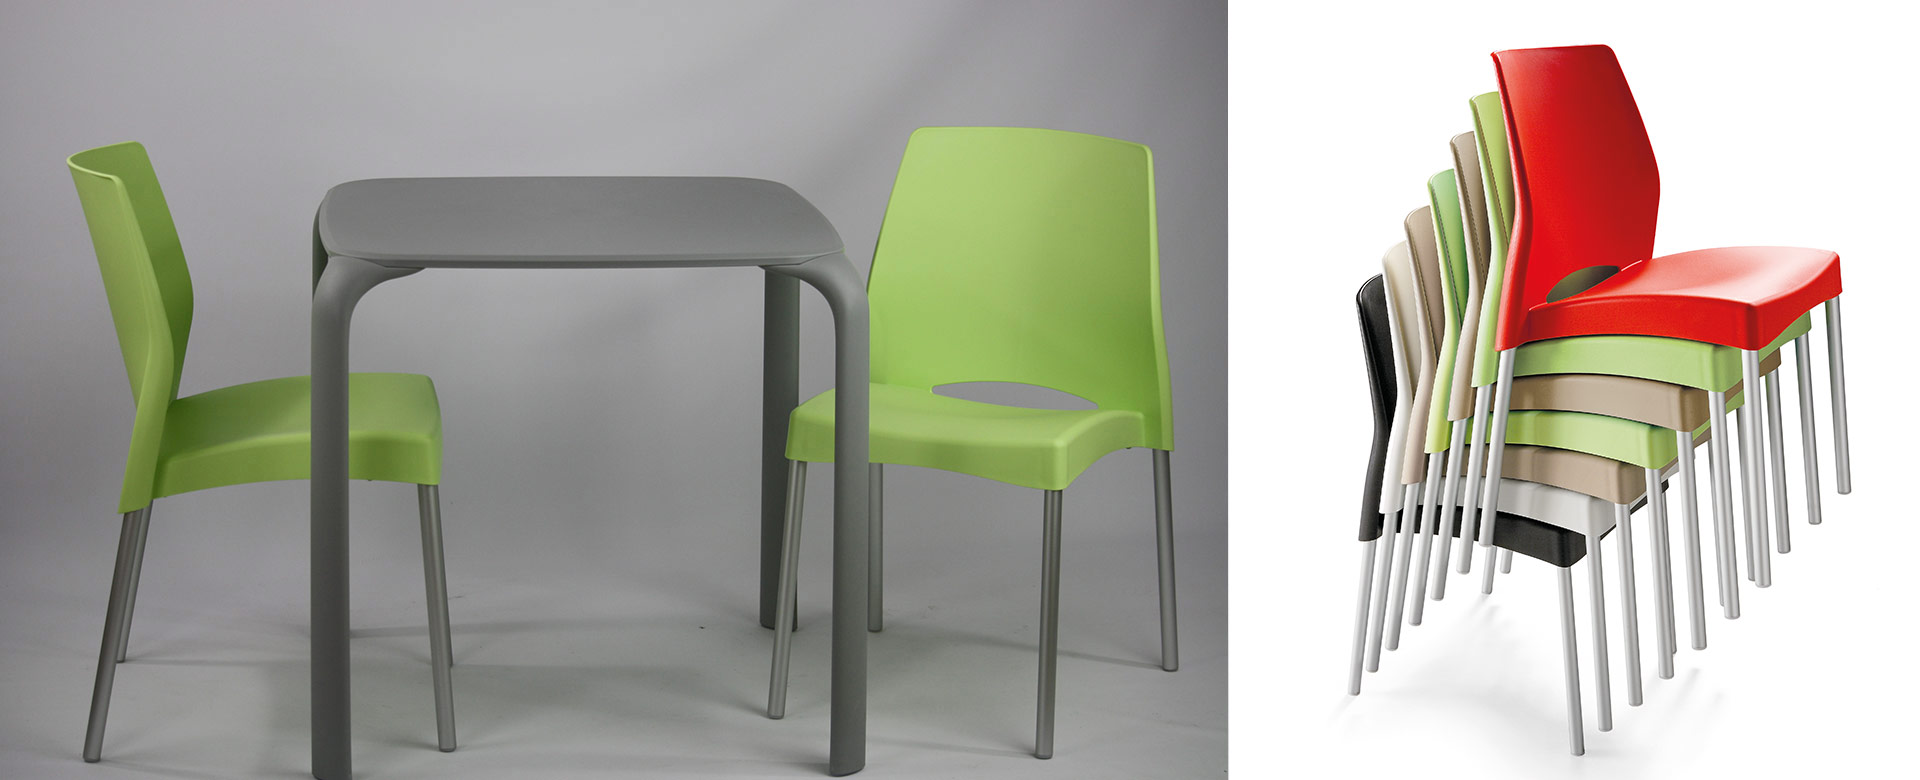 VACANZA Outdoor Chairs